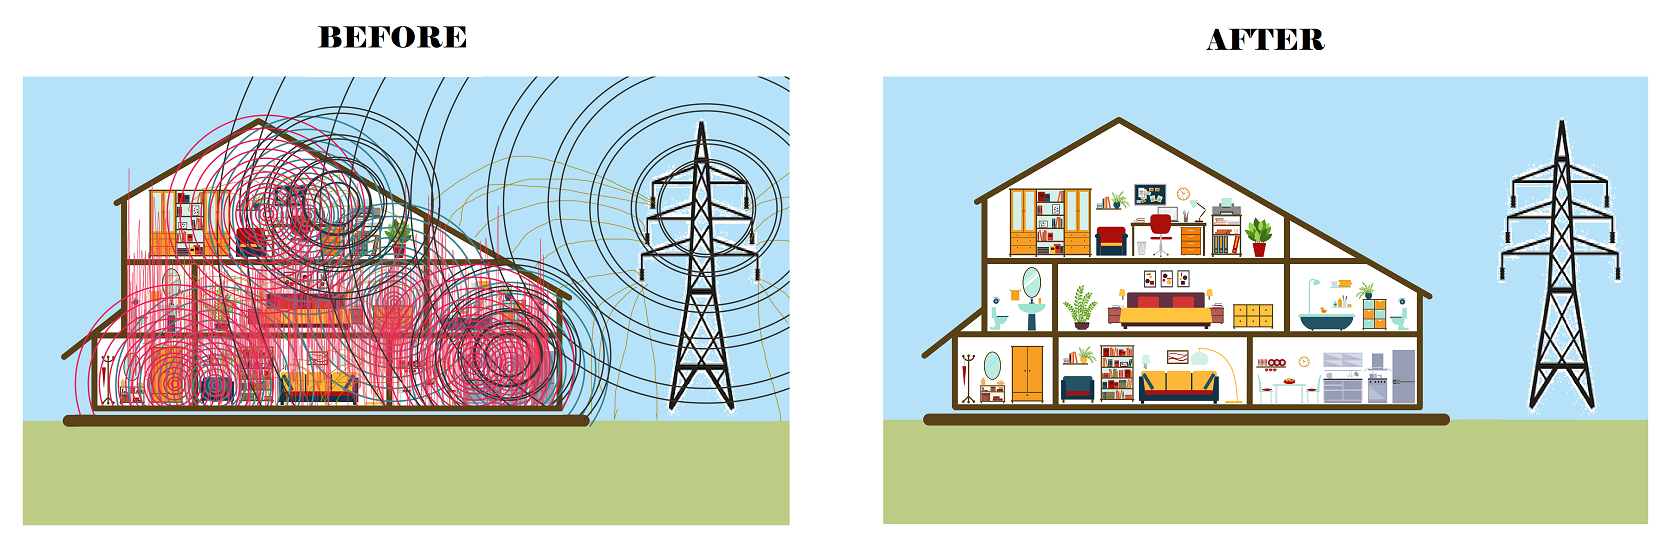 house before and after emf mitigation electromagnetic fields remediation